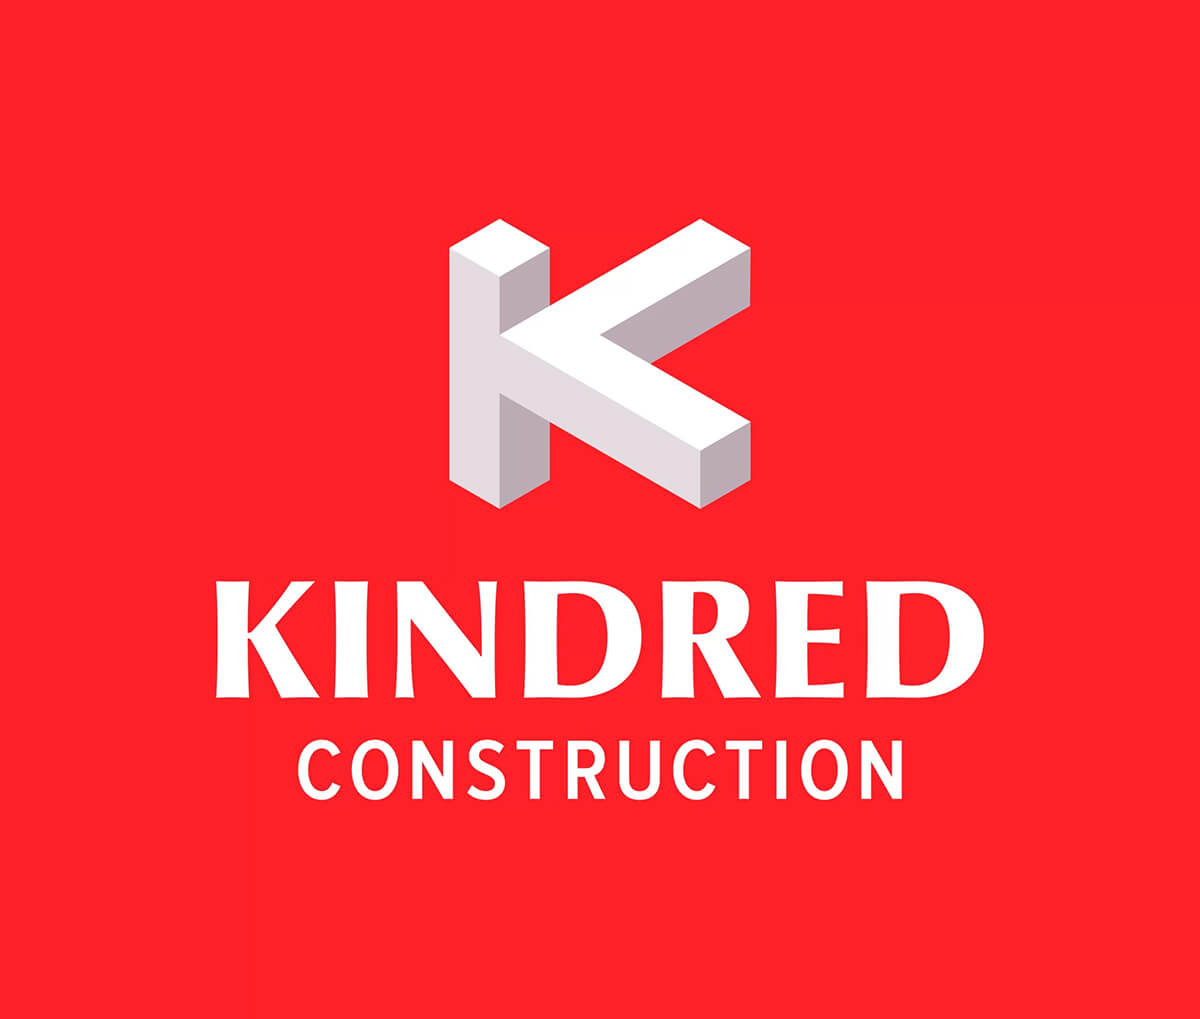 Kindred Construction logo in white on a bright red background